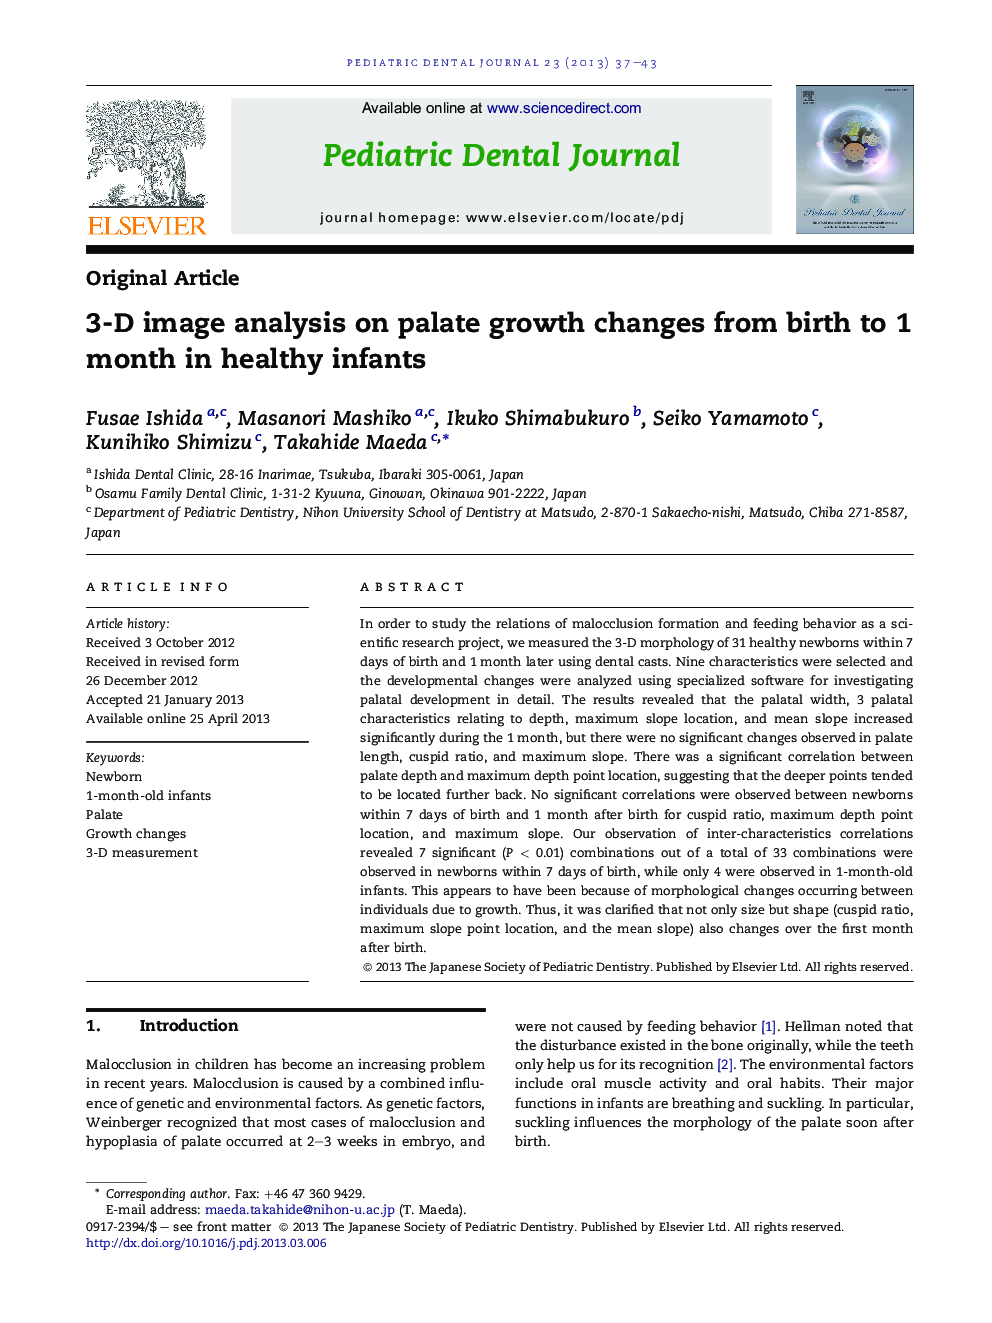 3-D image analysis on palate growth changes from birth to 1 month in healthy infants